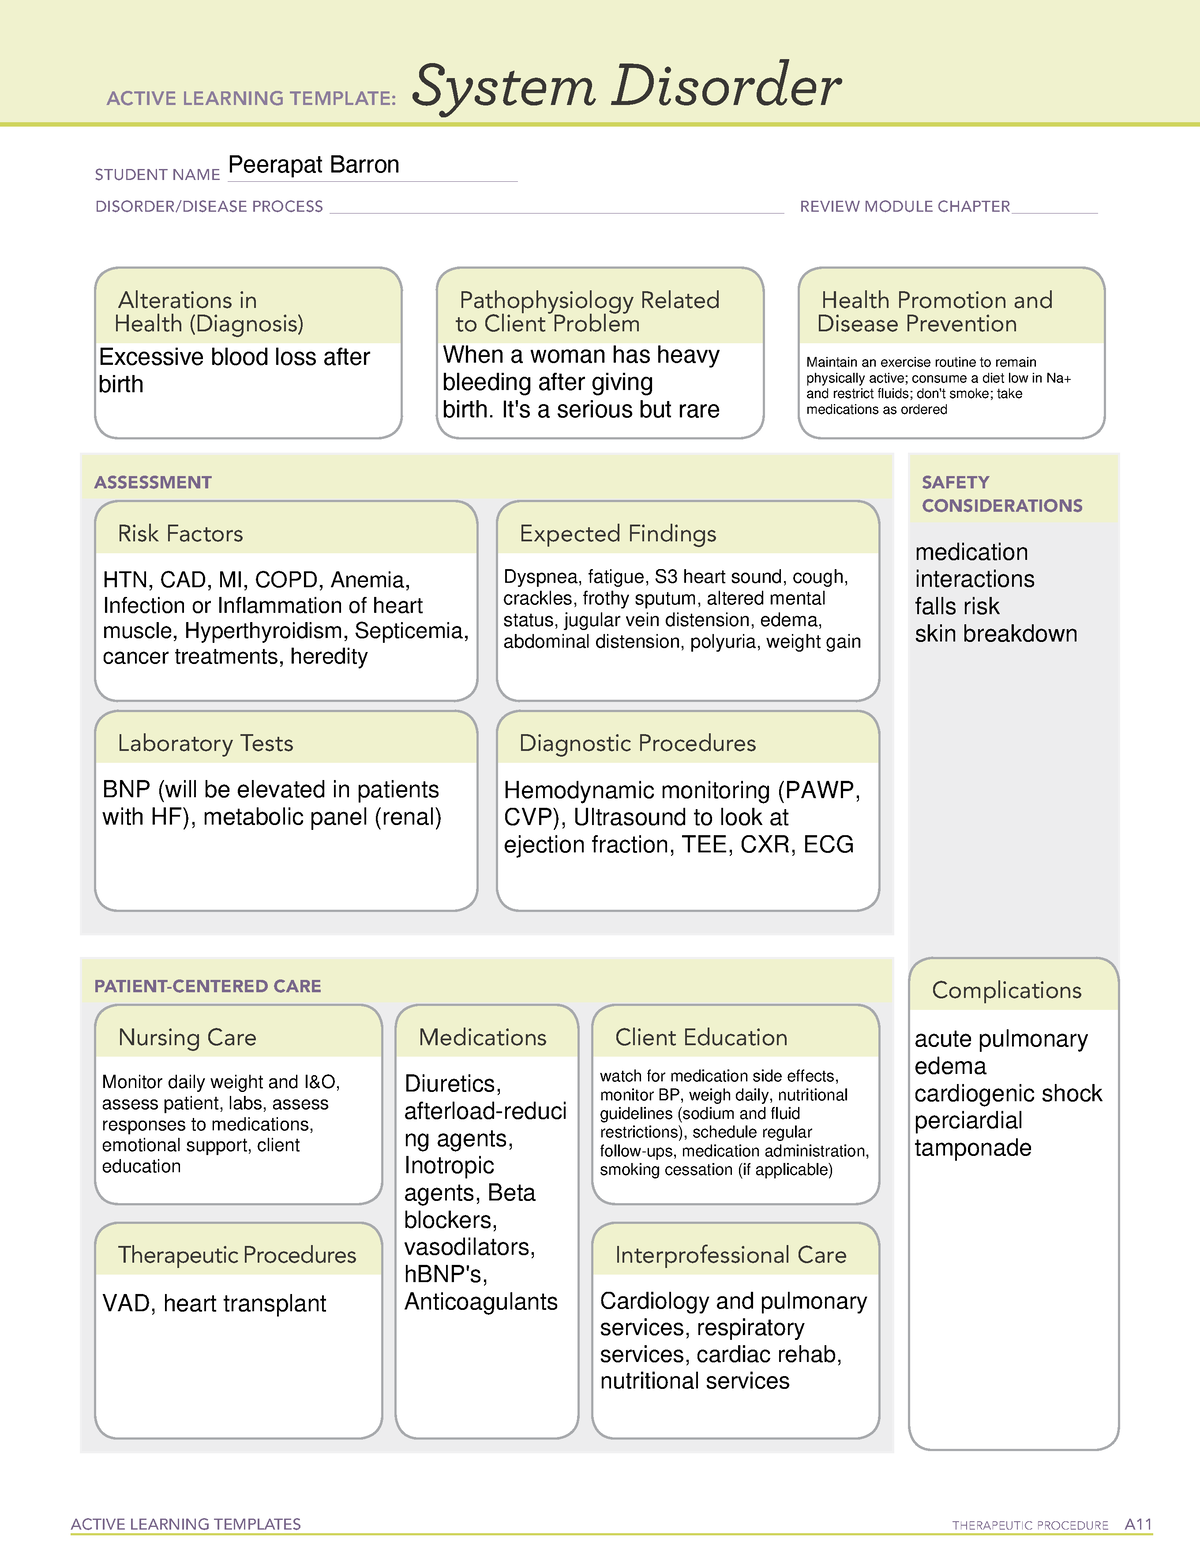 System Disorder ALT complete 2016 - ACTIVE LEARNING TEMPLATES ...